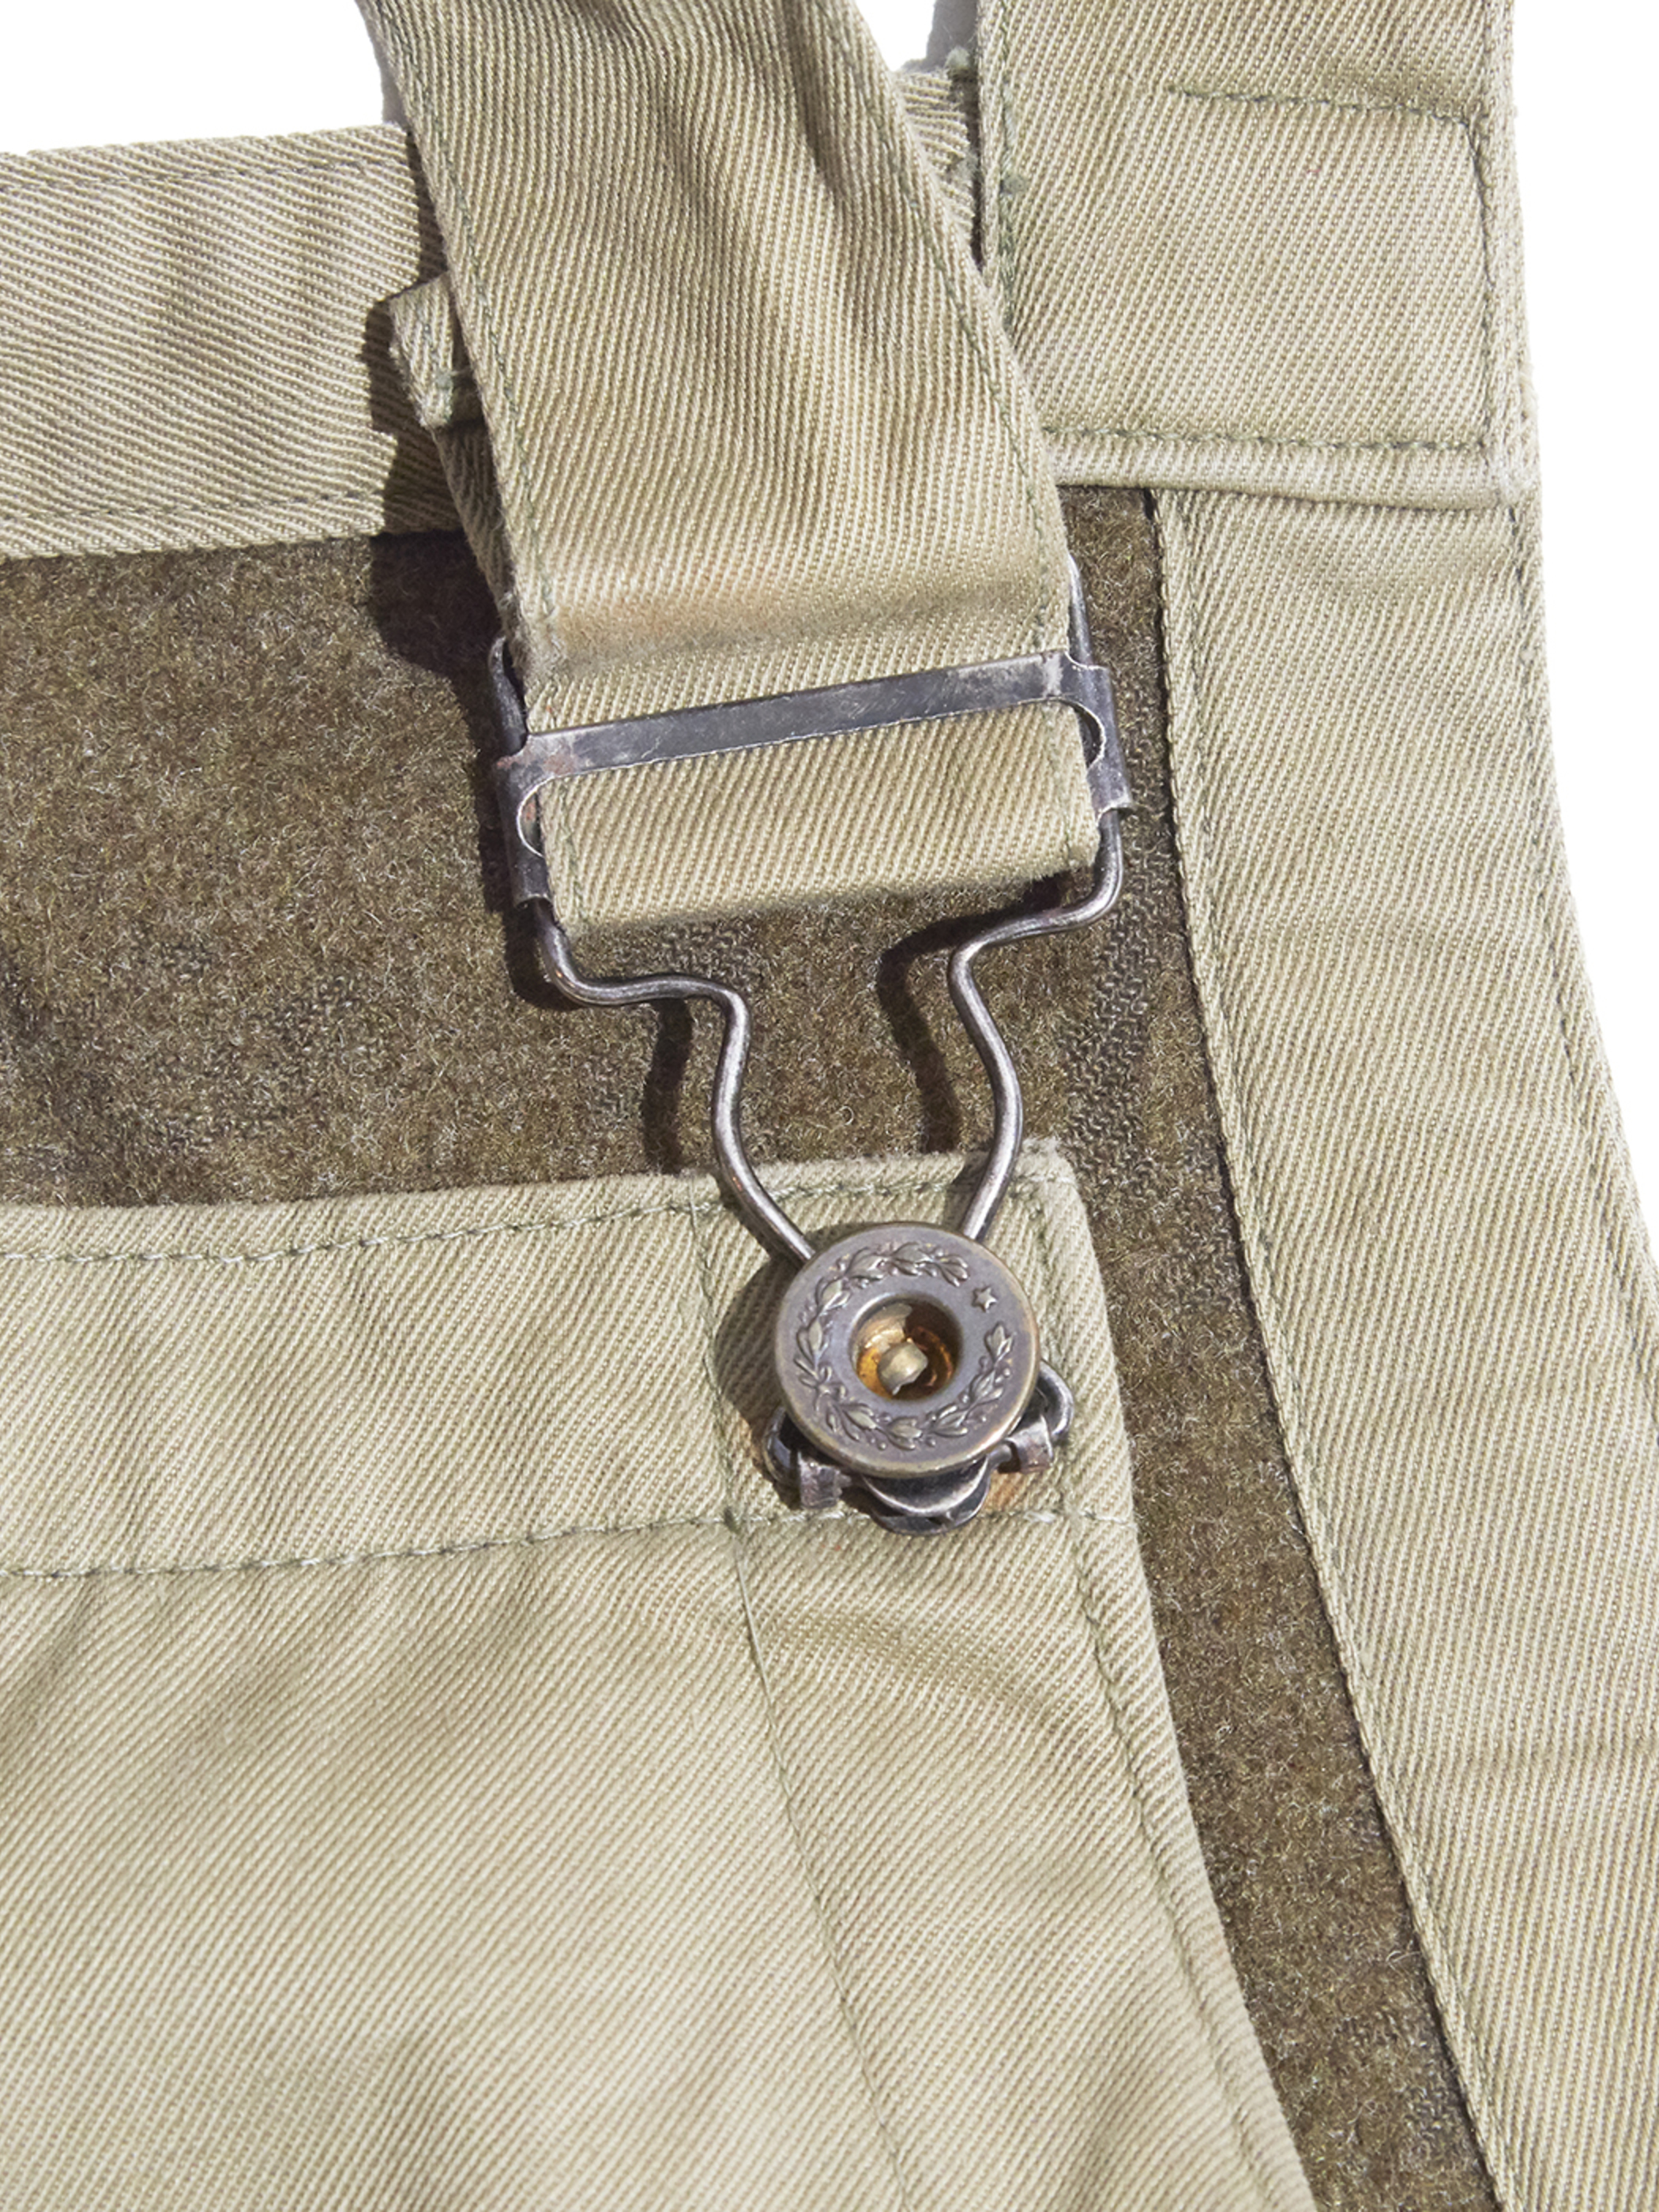 1940s "US ARMY" tankers overall -KHAKI-